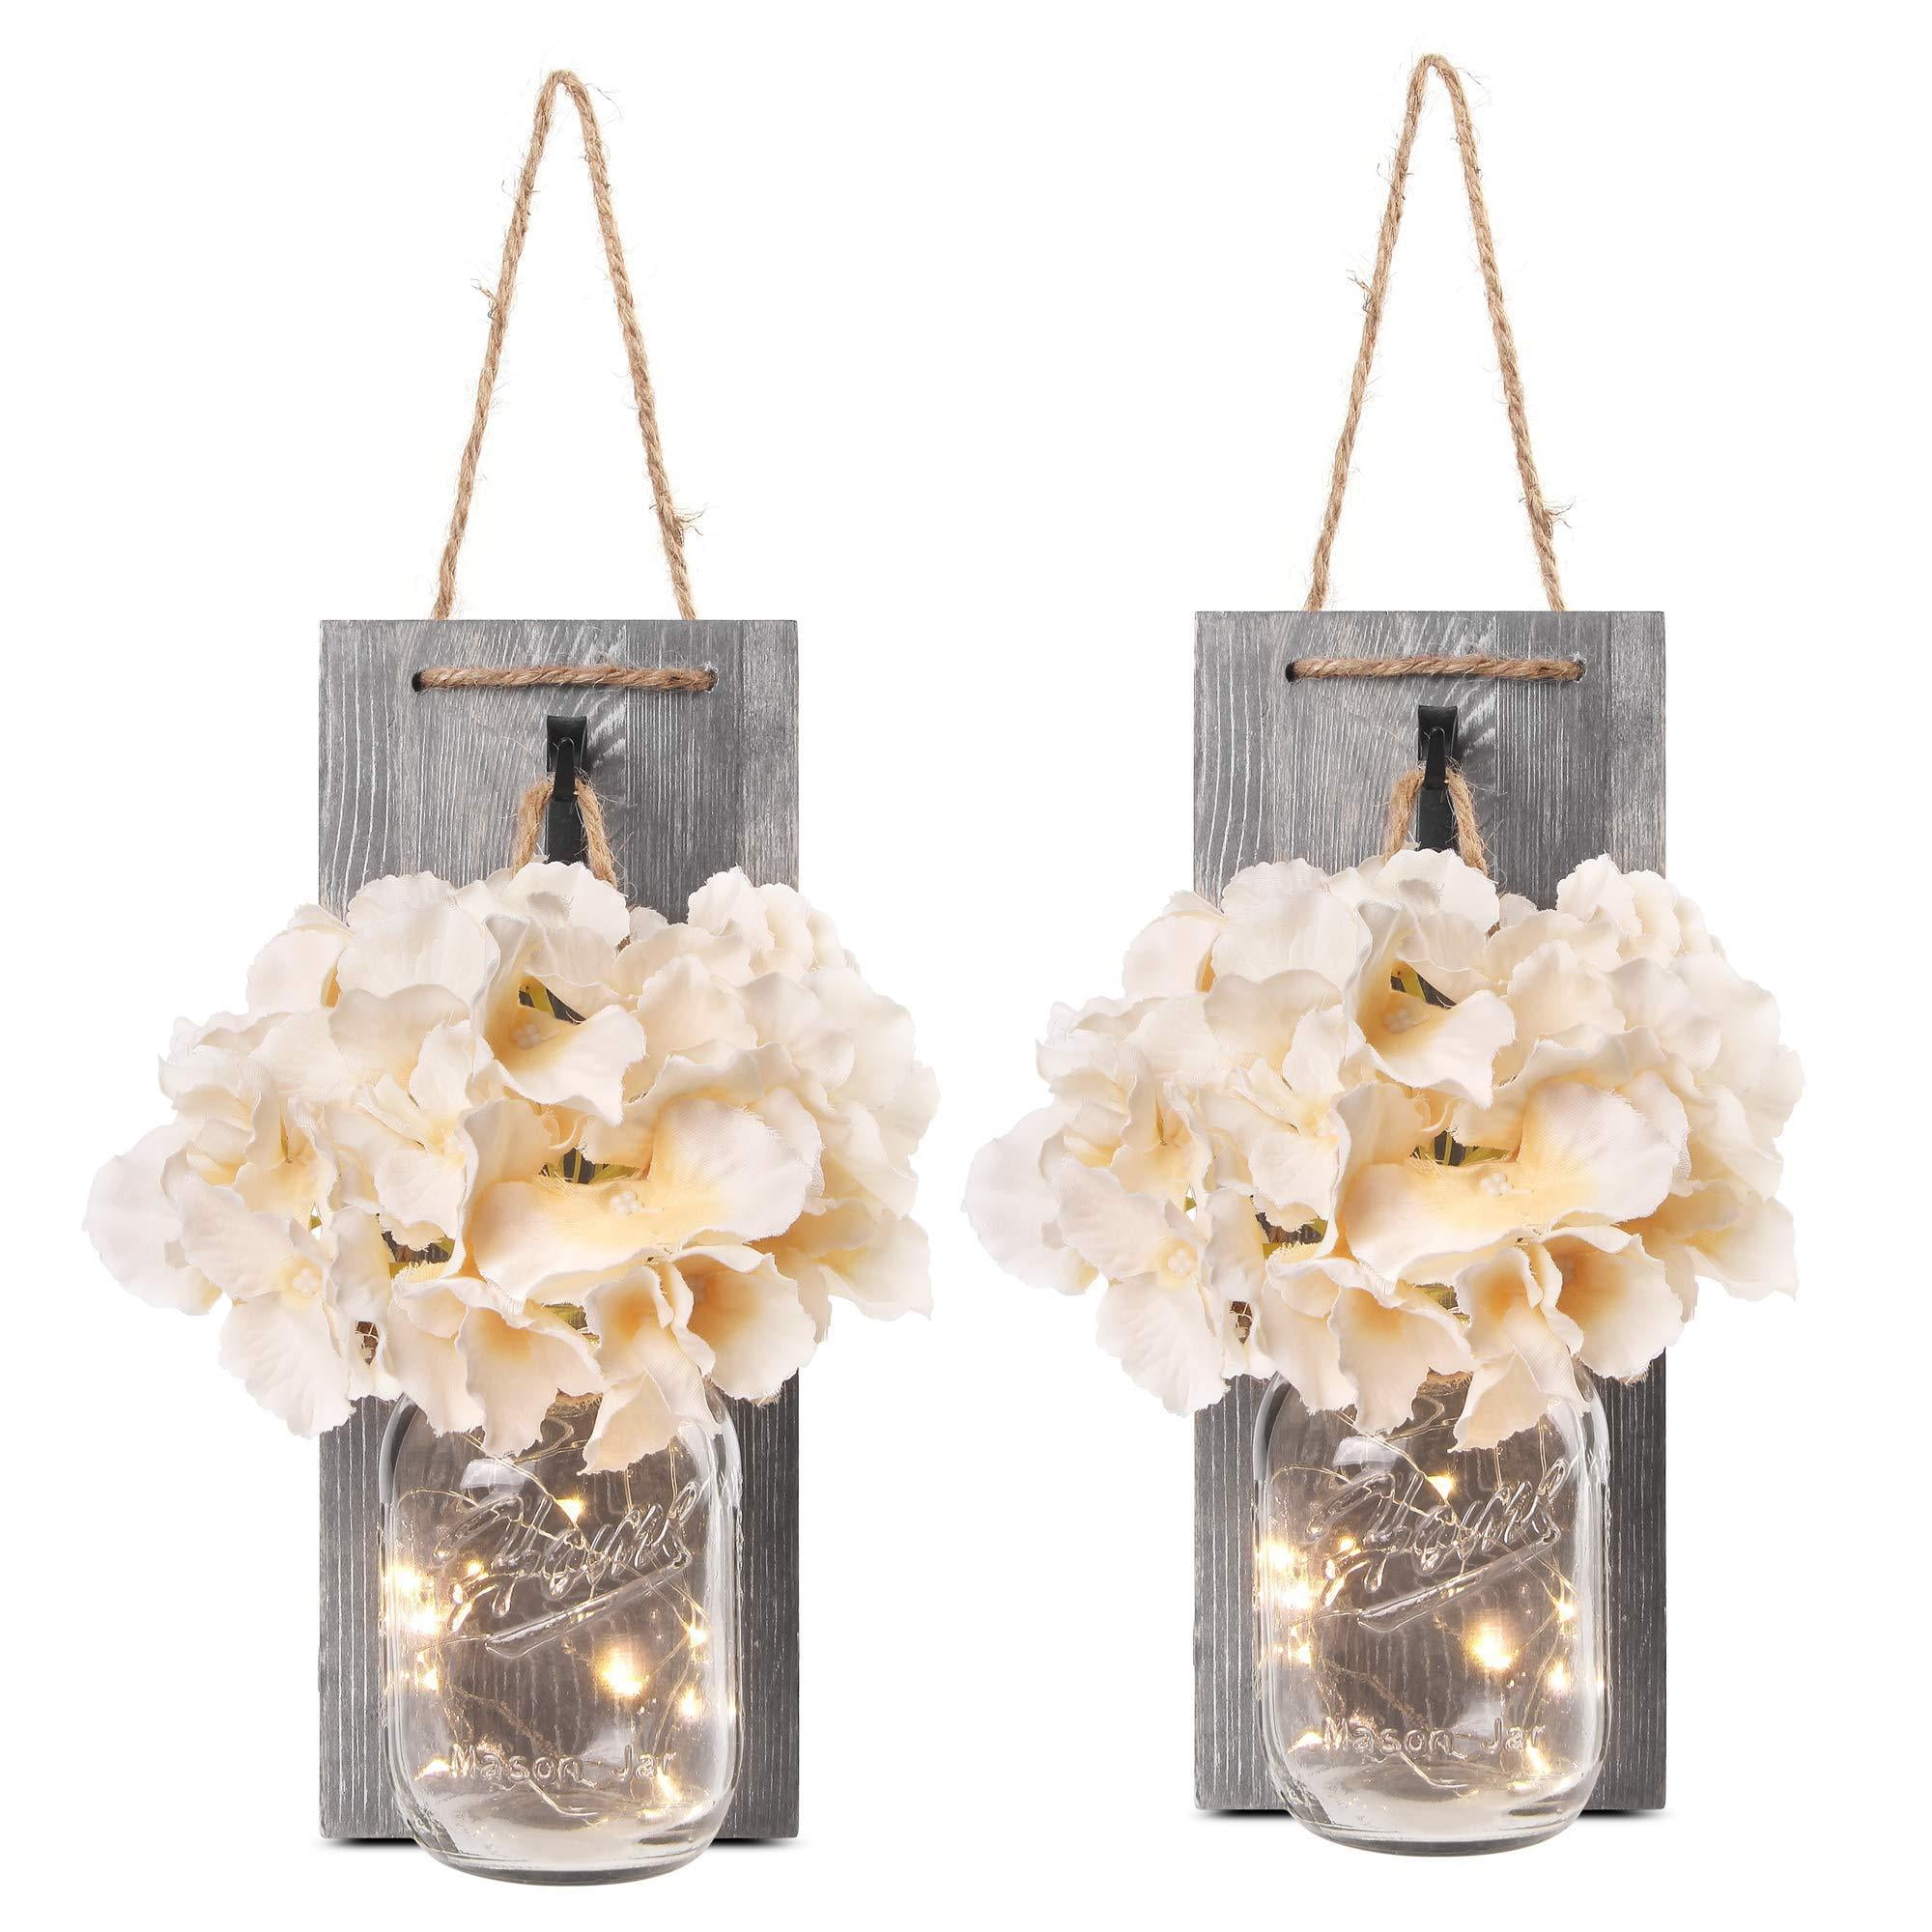 LED Fairy Lights with Automatic On and Off Timer Vintage Wall Hanging Decor Home Decorative Lighting Besuerte Mason Jar Wall Sconces Rustic Brown Set